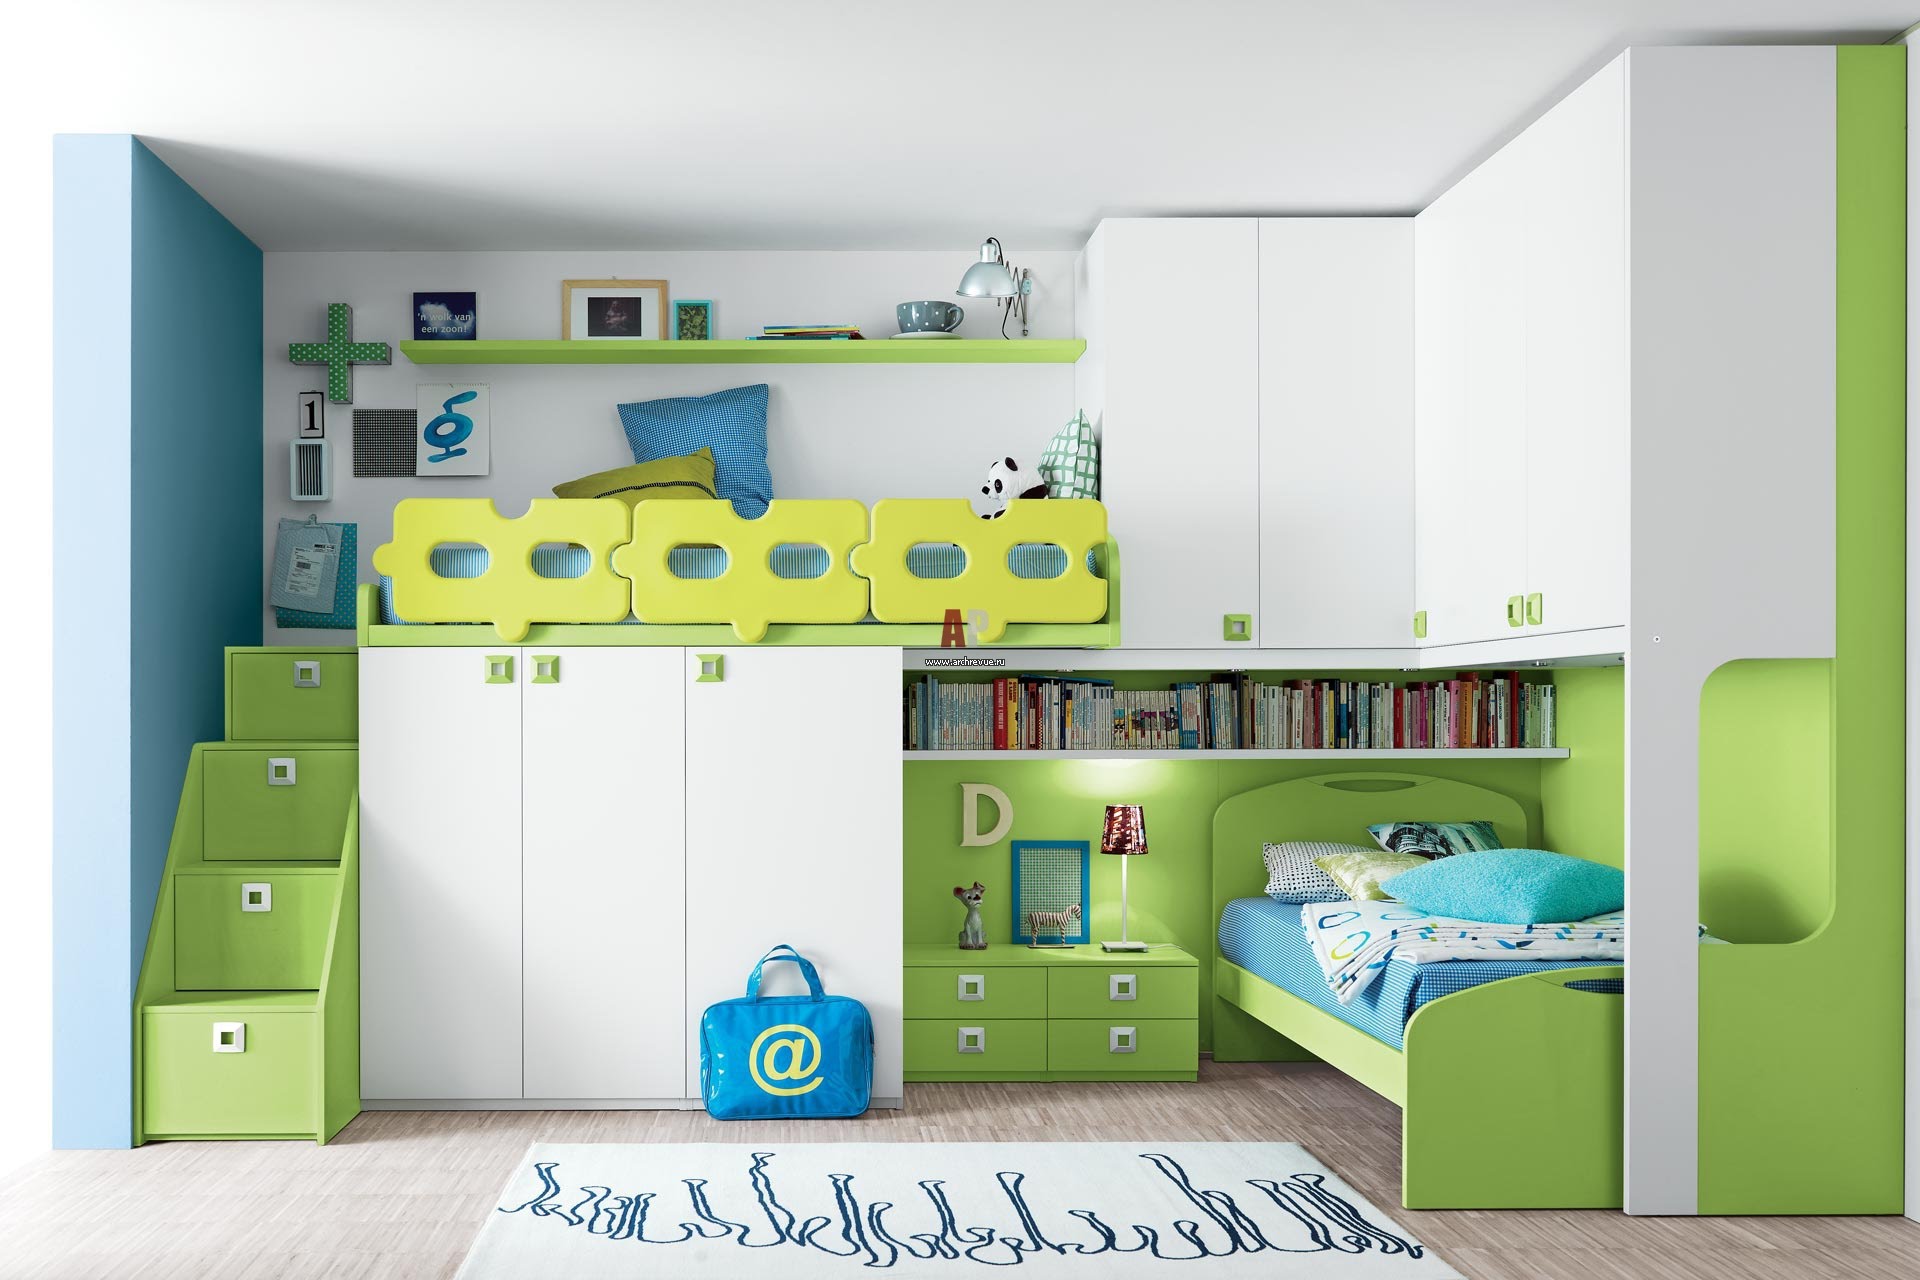 an example of a bright modern interior for children